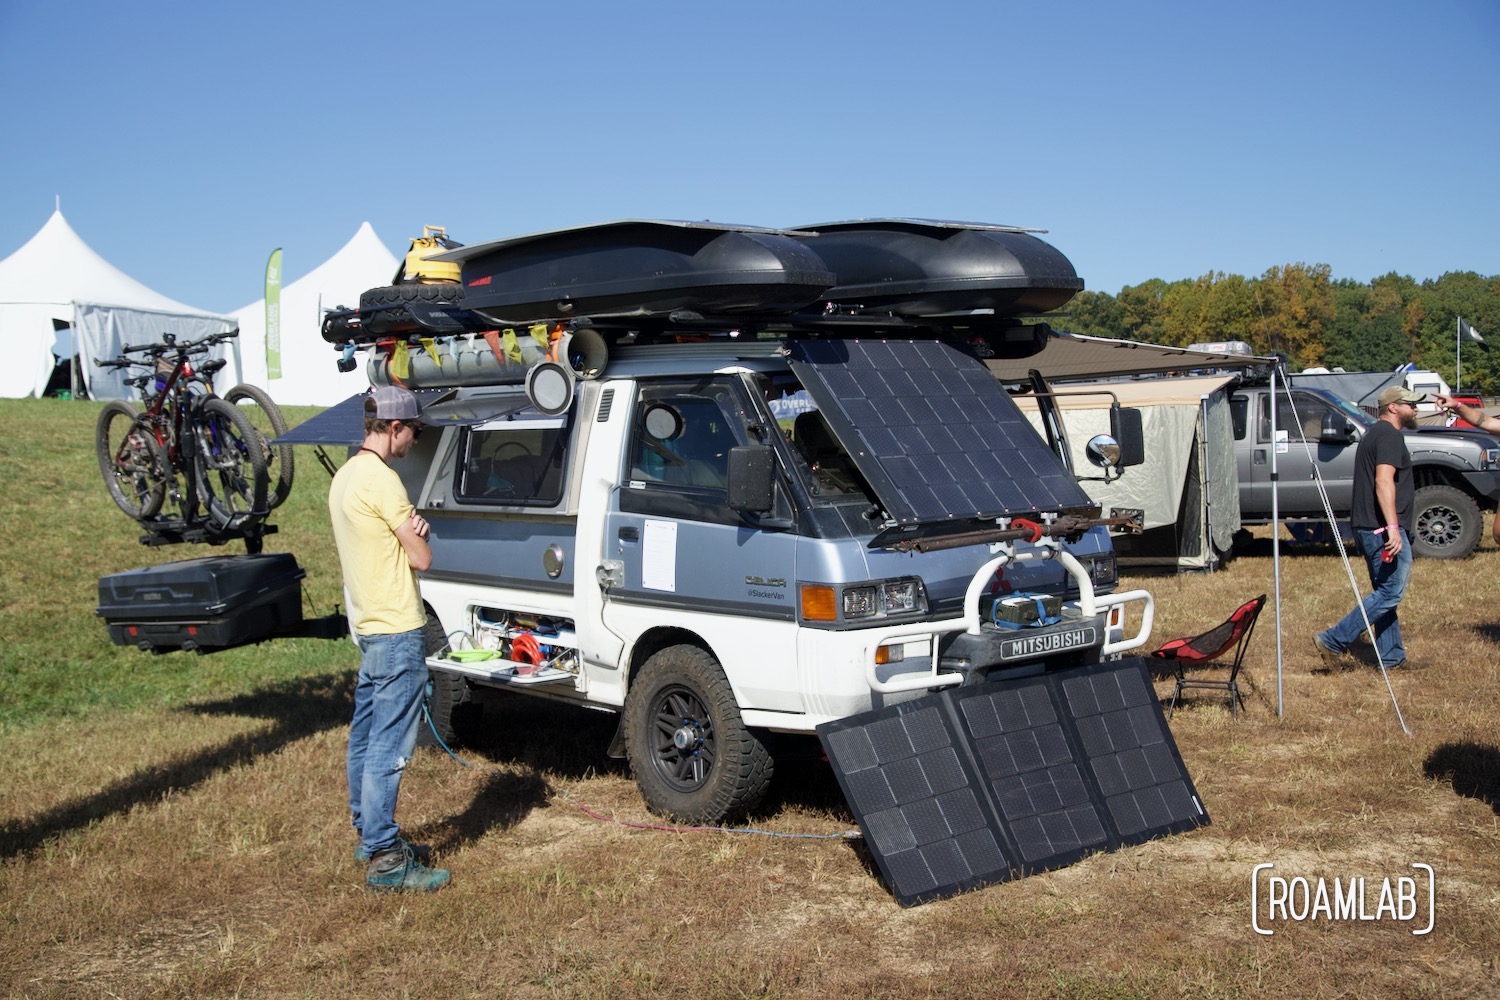 Slacker Van with solar panels deployed at the DIY Showcase during Overland Expo East 2022.